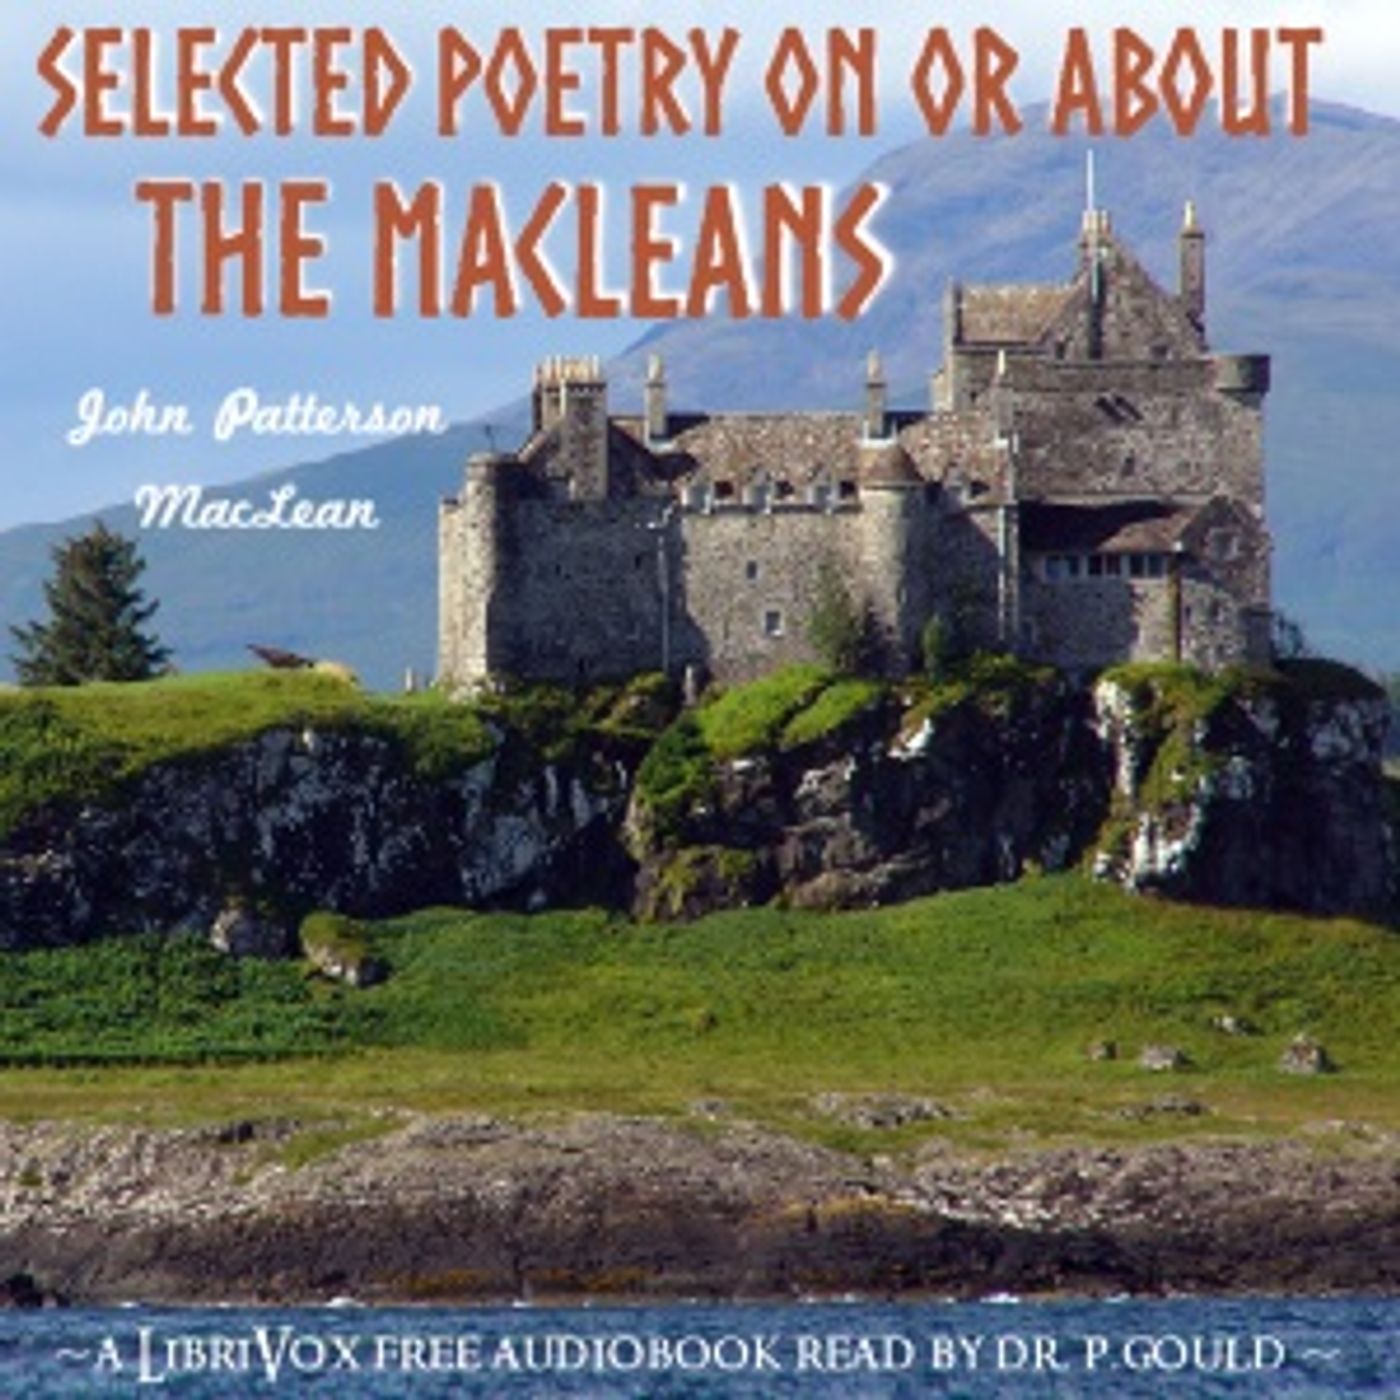 Selected Poetry on or about the MacLeans by John Patterson MacLean (1848 – 1939)